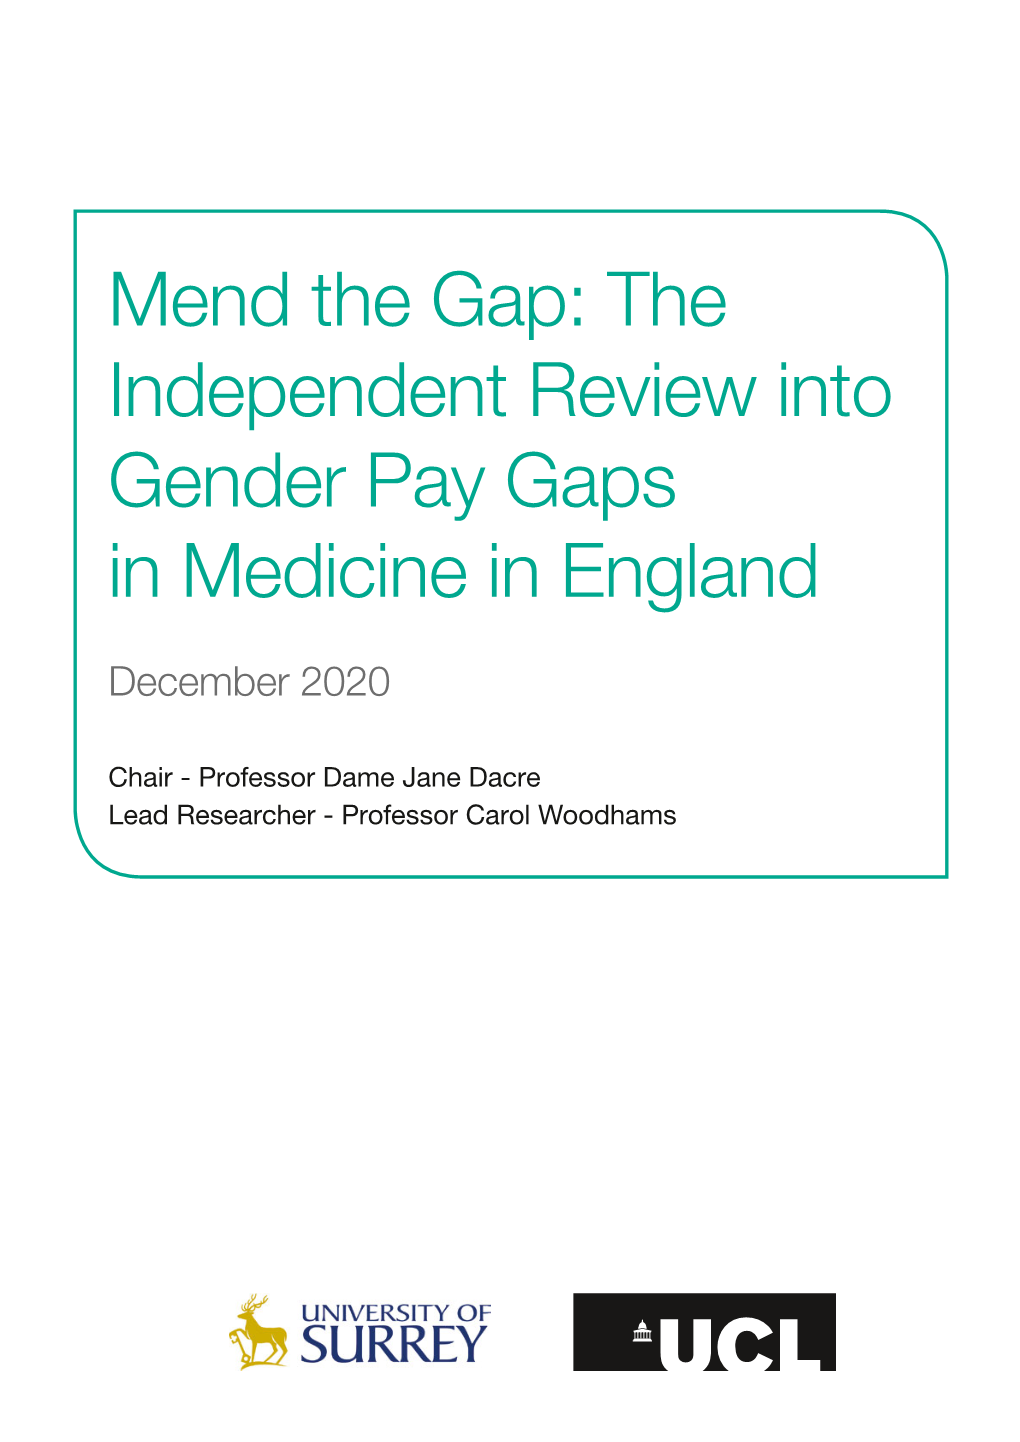 The Independent Review Into Gender Pay Gaps in Medicine in England